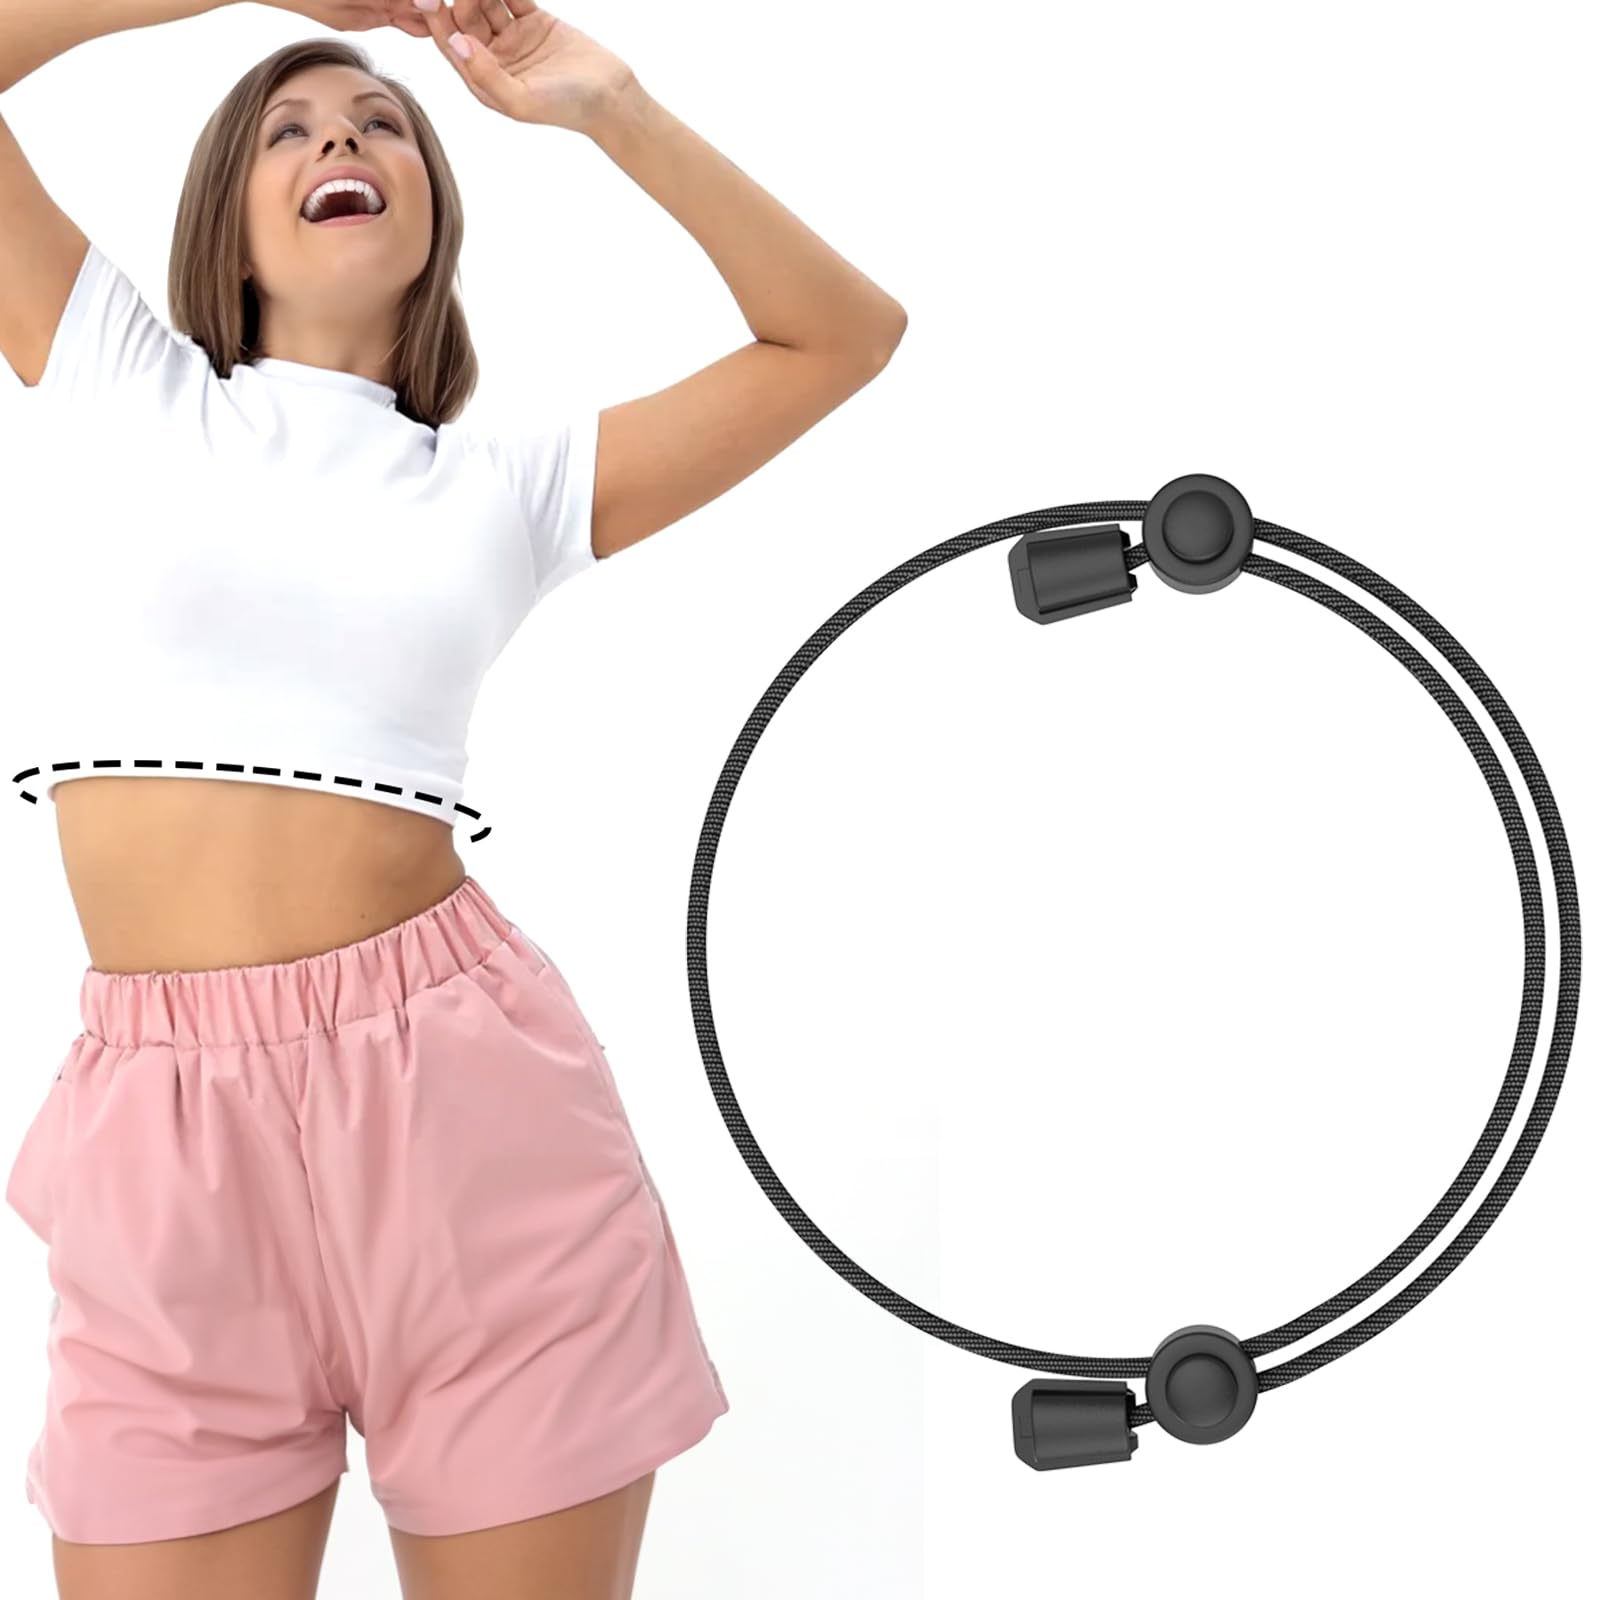 Crop Tuck Adjustable Band, Crop Tuck Tool for Sweater and Shirt, Belly Leaking Crop Tuck Band, The Elastic Band to Change The Style of Your Tops(1PC, Black, Size:Medium)